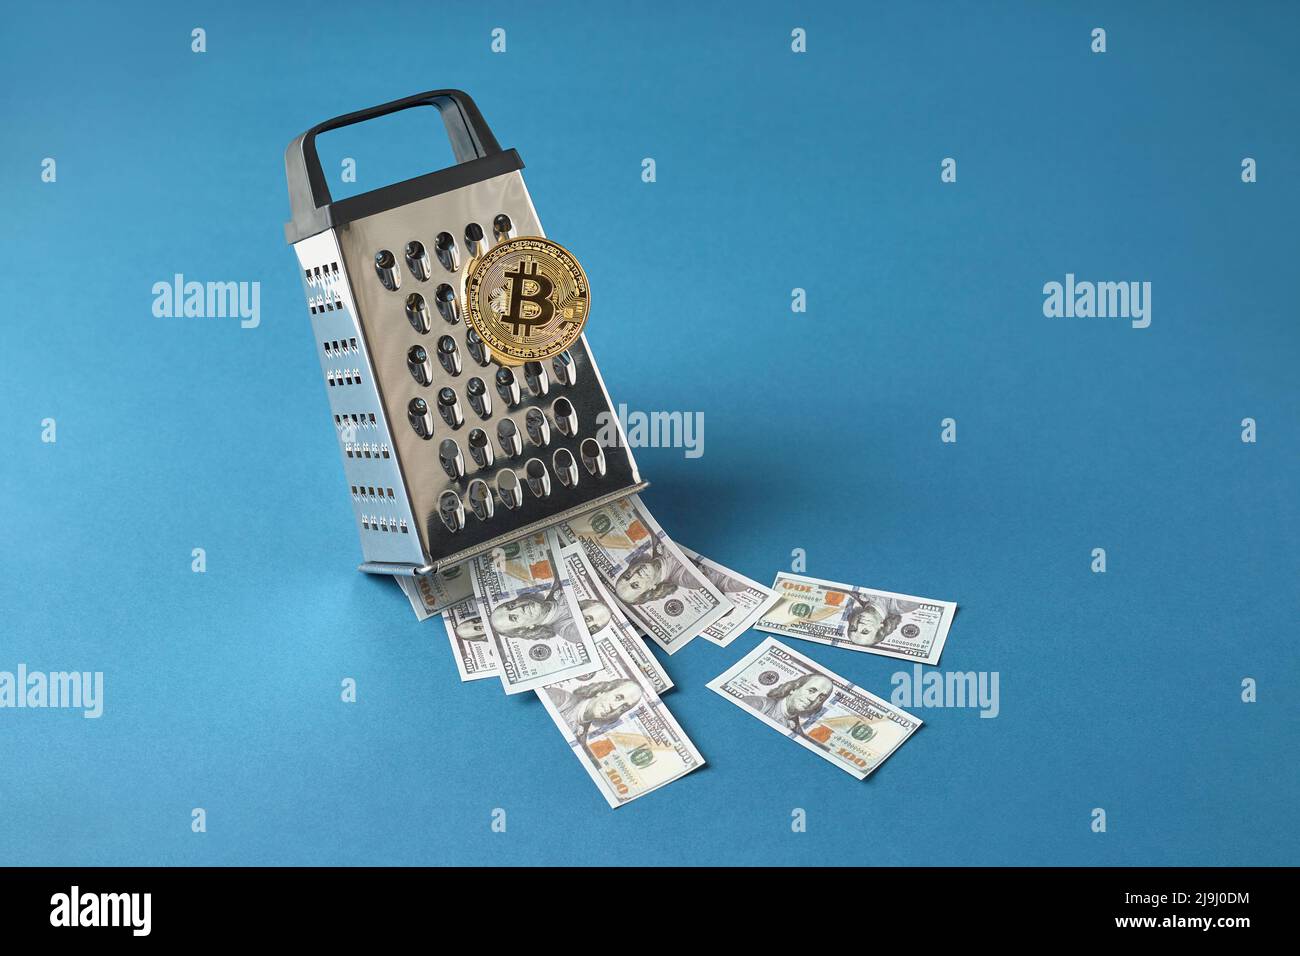 Coin Bitcoin transform to dollar bills with steel grater, Exchange transaction creative concept Stock Photo